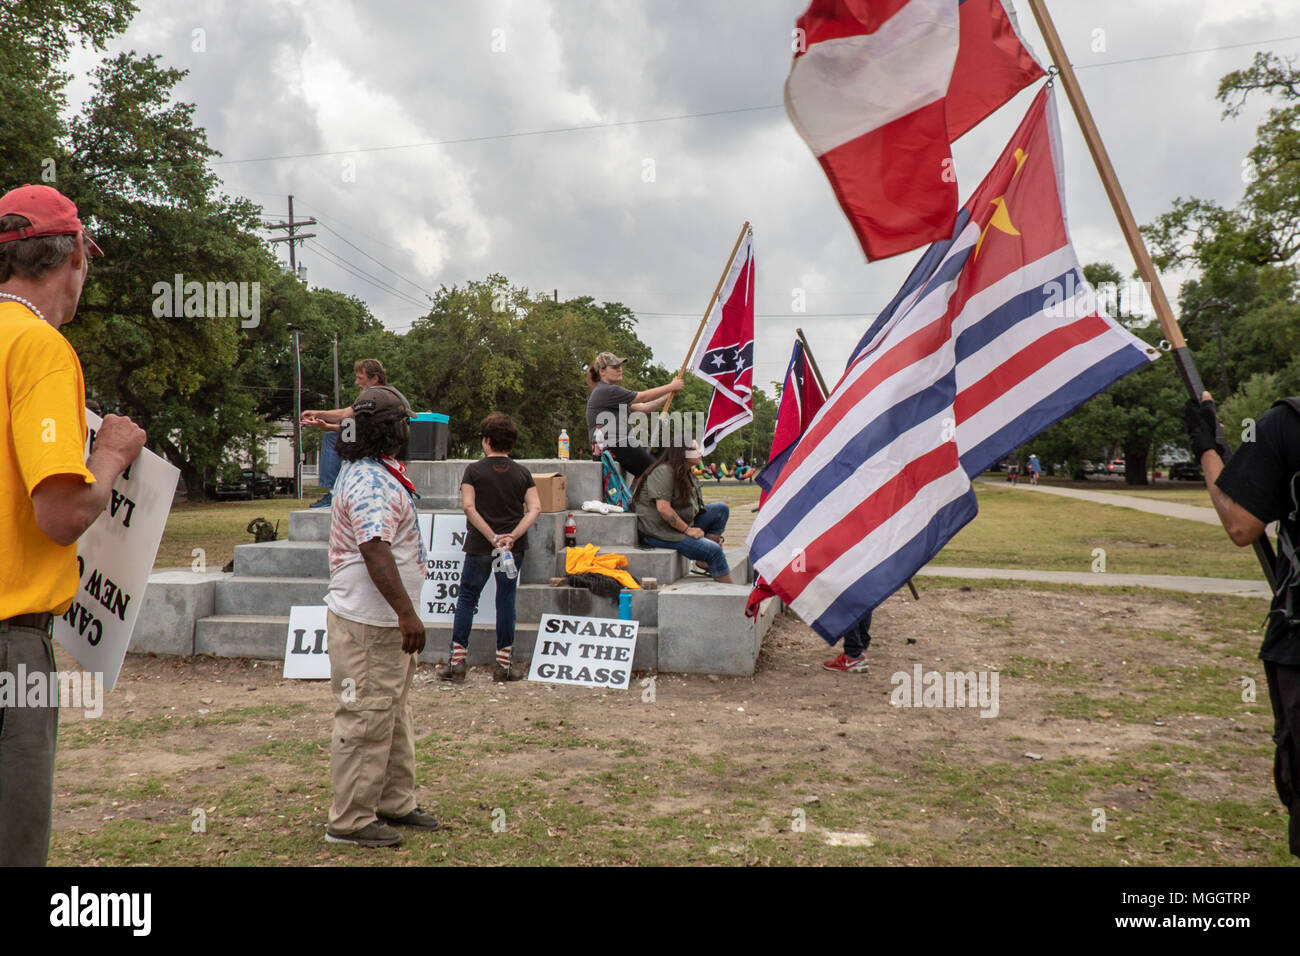 New Orleans, Louisiana - Carrying various Confederate flags, a small group holds a vigil at the site where a statue of Jefferson Davis was removed in  Stock Photo